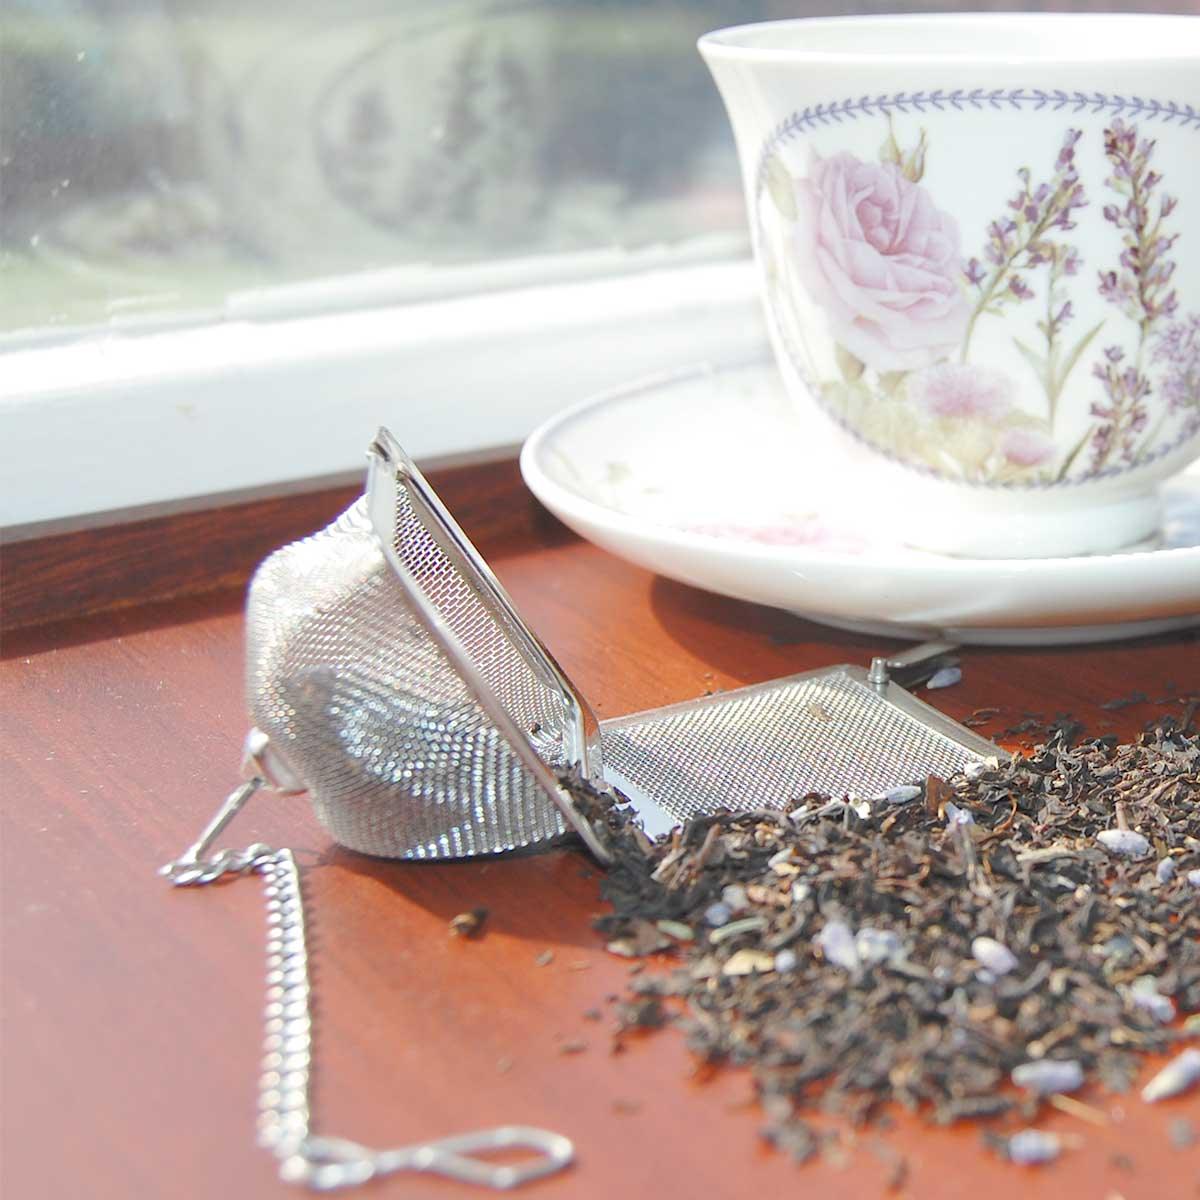 Set of 3 Tea Blends with Infuser and Caddy - Kharislavender